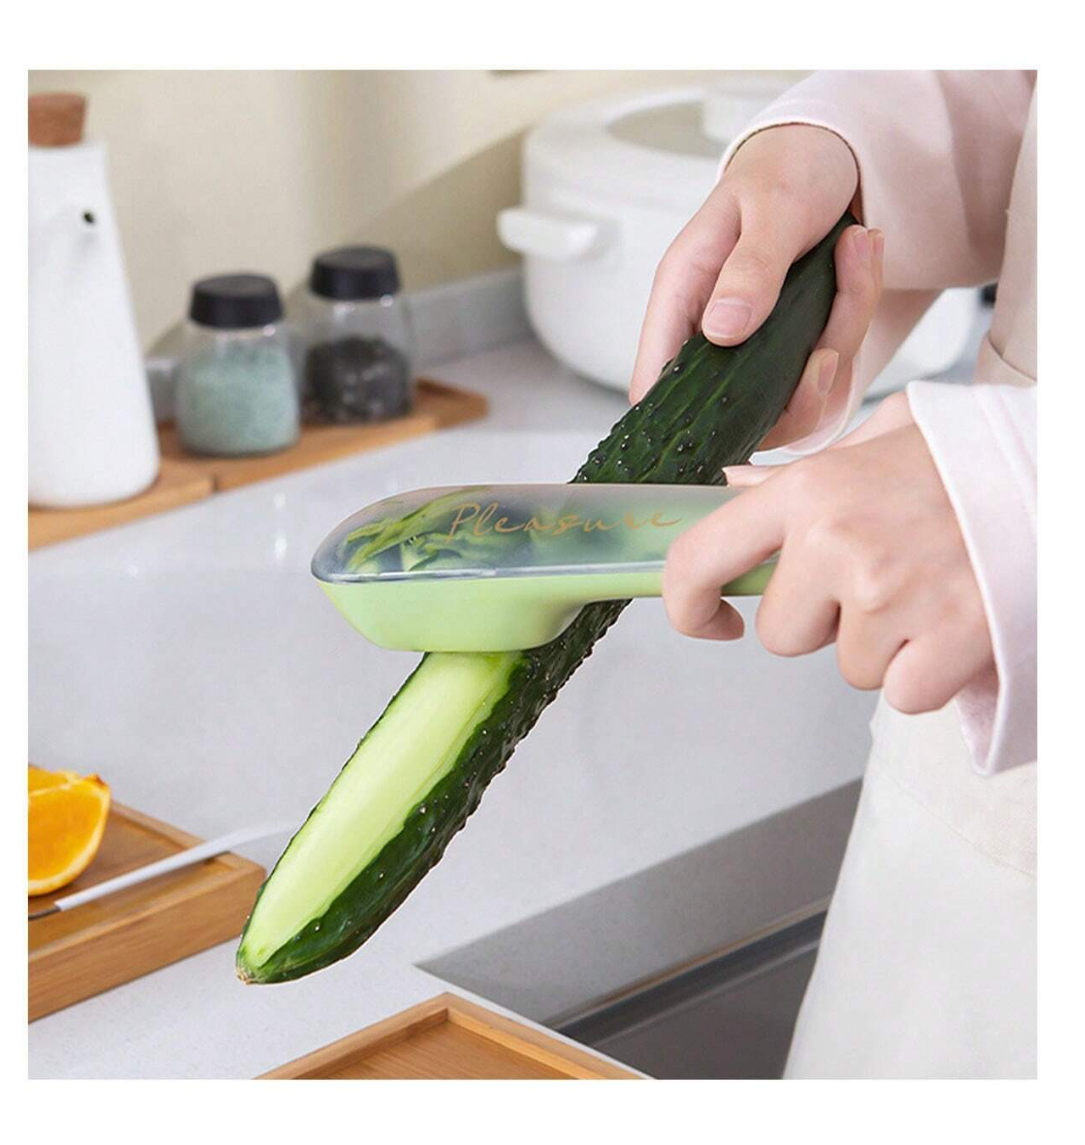 Slice, Store, and Simplify: Revolutionize Your Kitchen with our Multifunctional Stainless Steel Peeler!